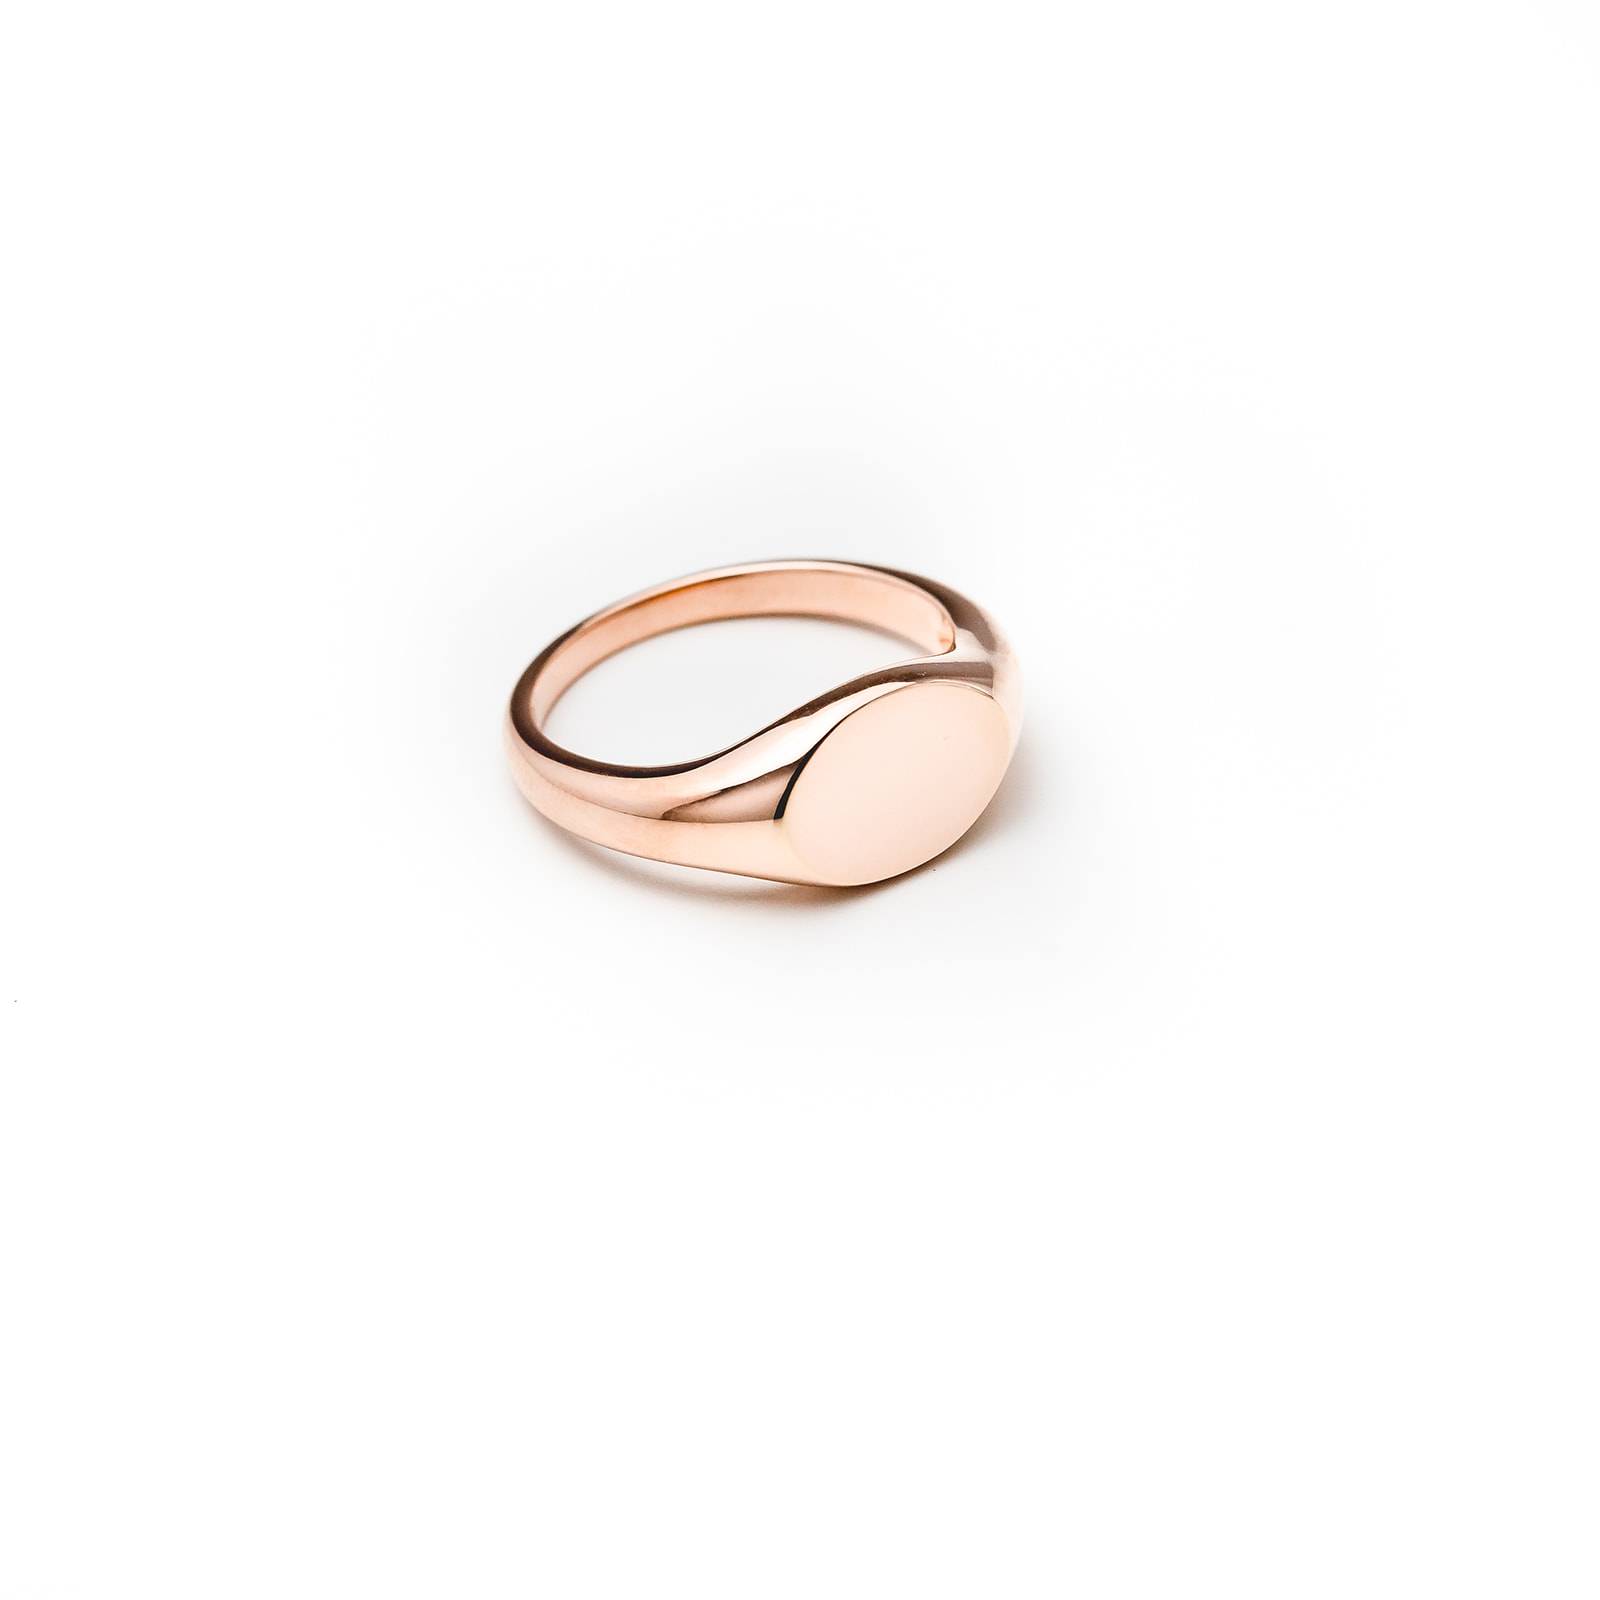 rose gold signet ring you can engrave